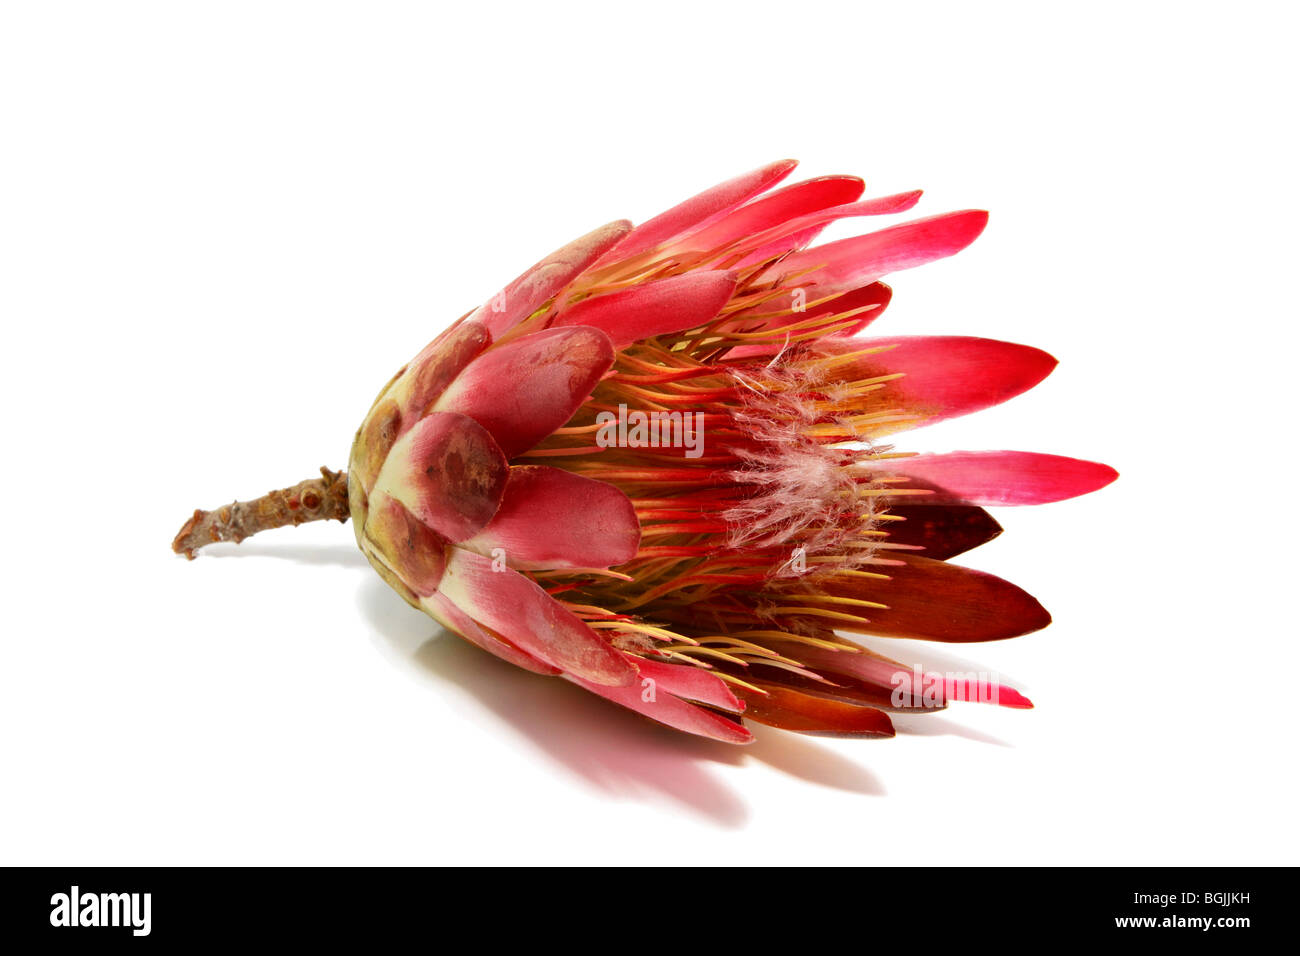 Protea flower isolated on a white background Stock Photo